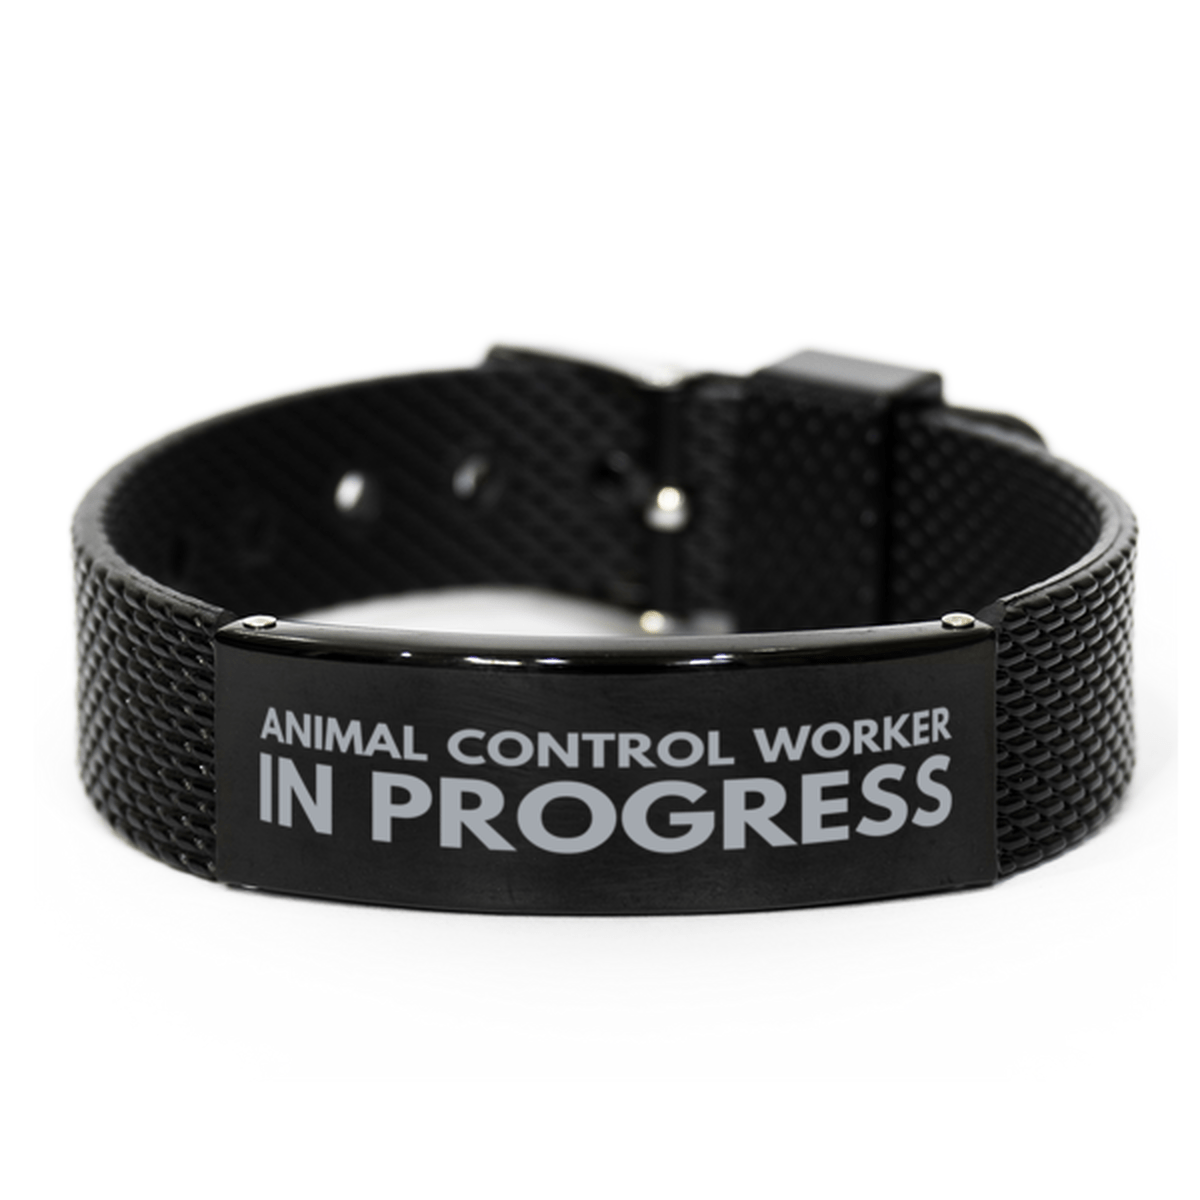 Inspirational Animal Control Worker Black Shark Mesh Bracelet, Animal Control Worker In Progress, Best Graduation Gifts for Students